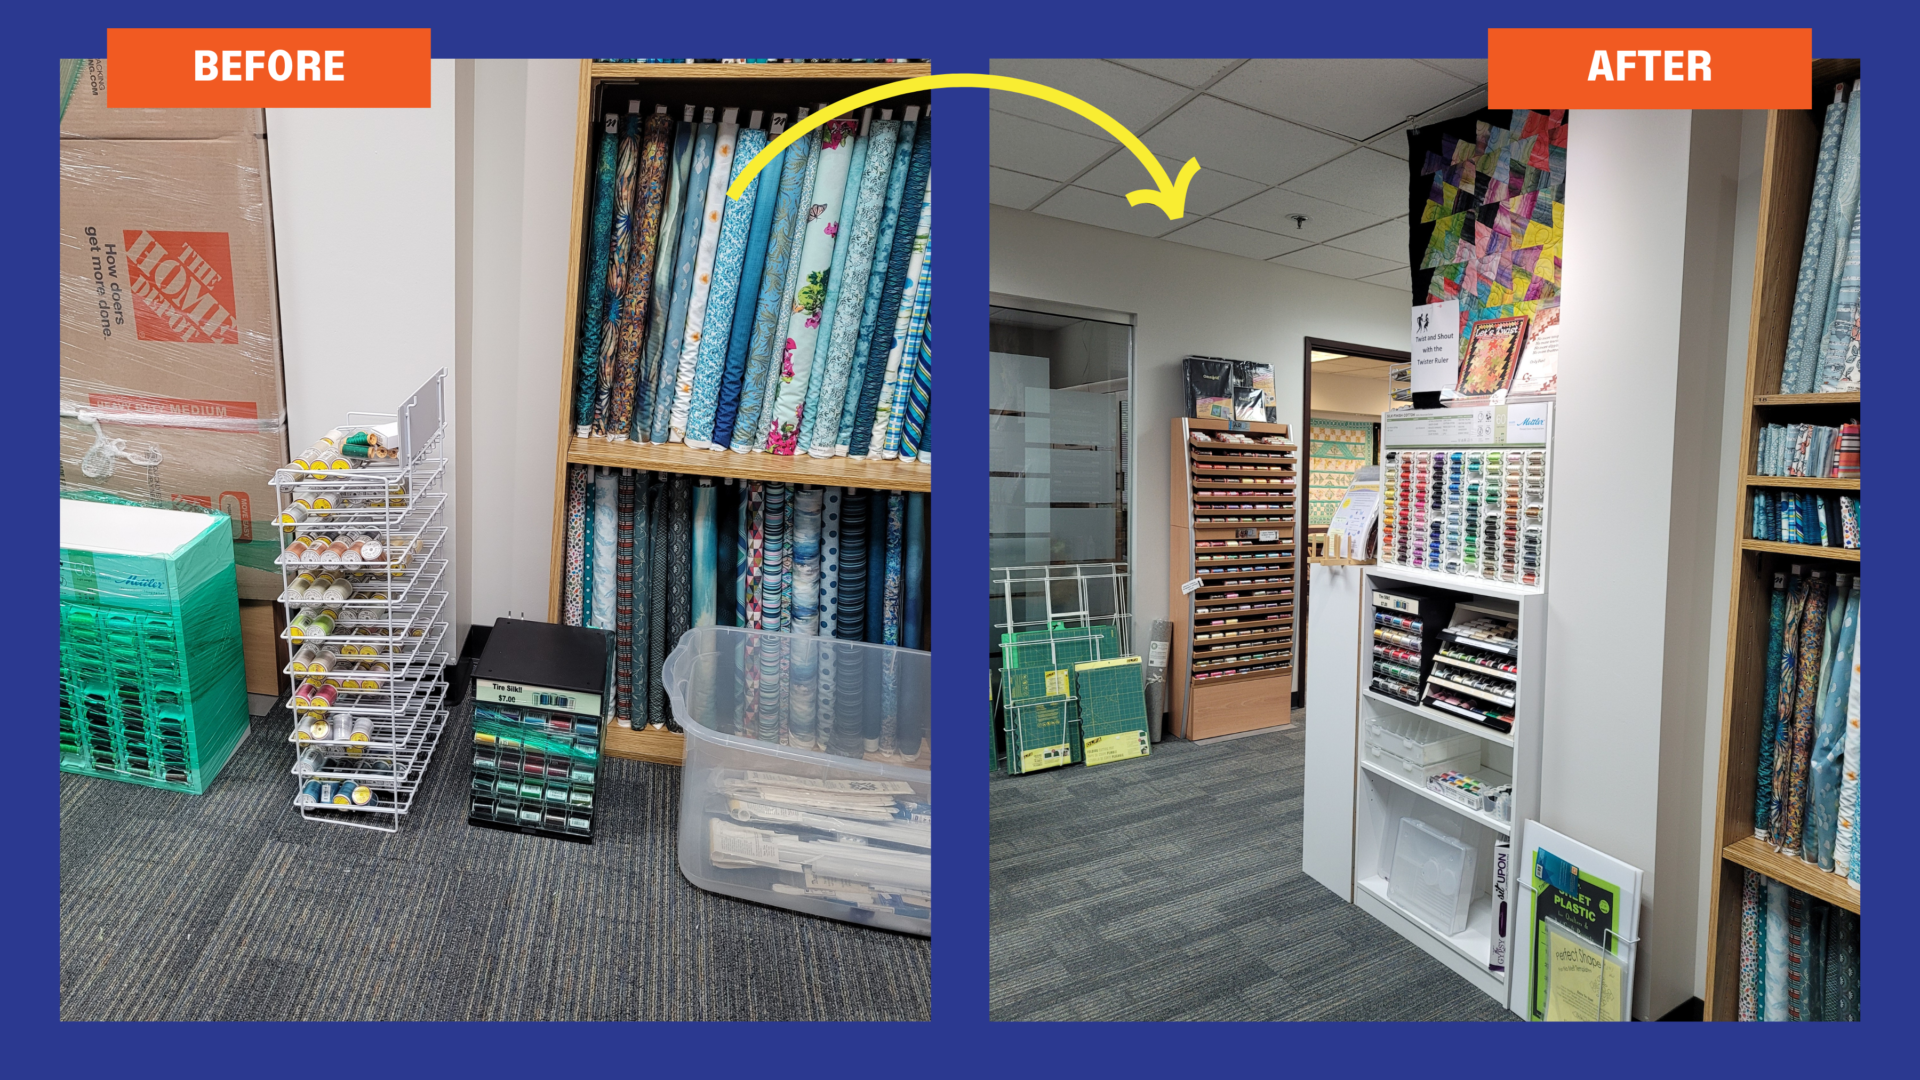 Before and after image of a fabric storage area. It is to help unpack supplies and organize in a way that helps them choose by color, pattern, and type.